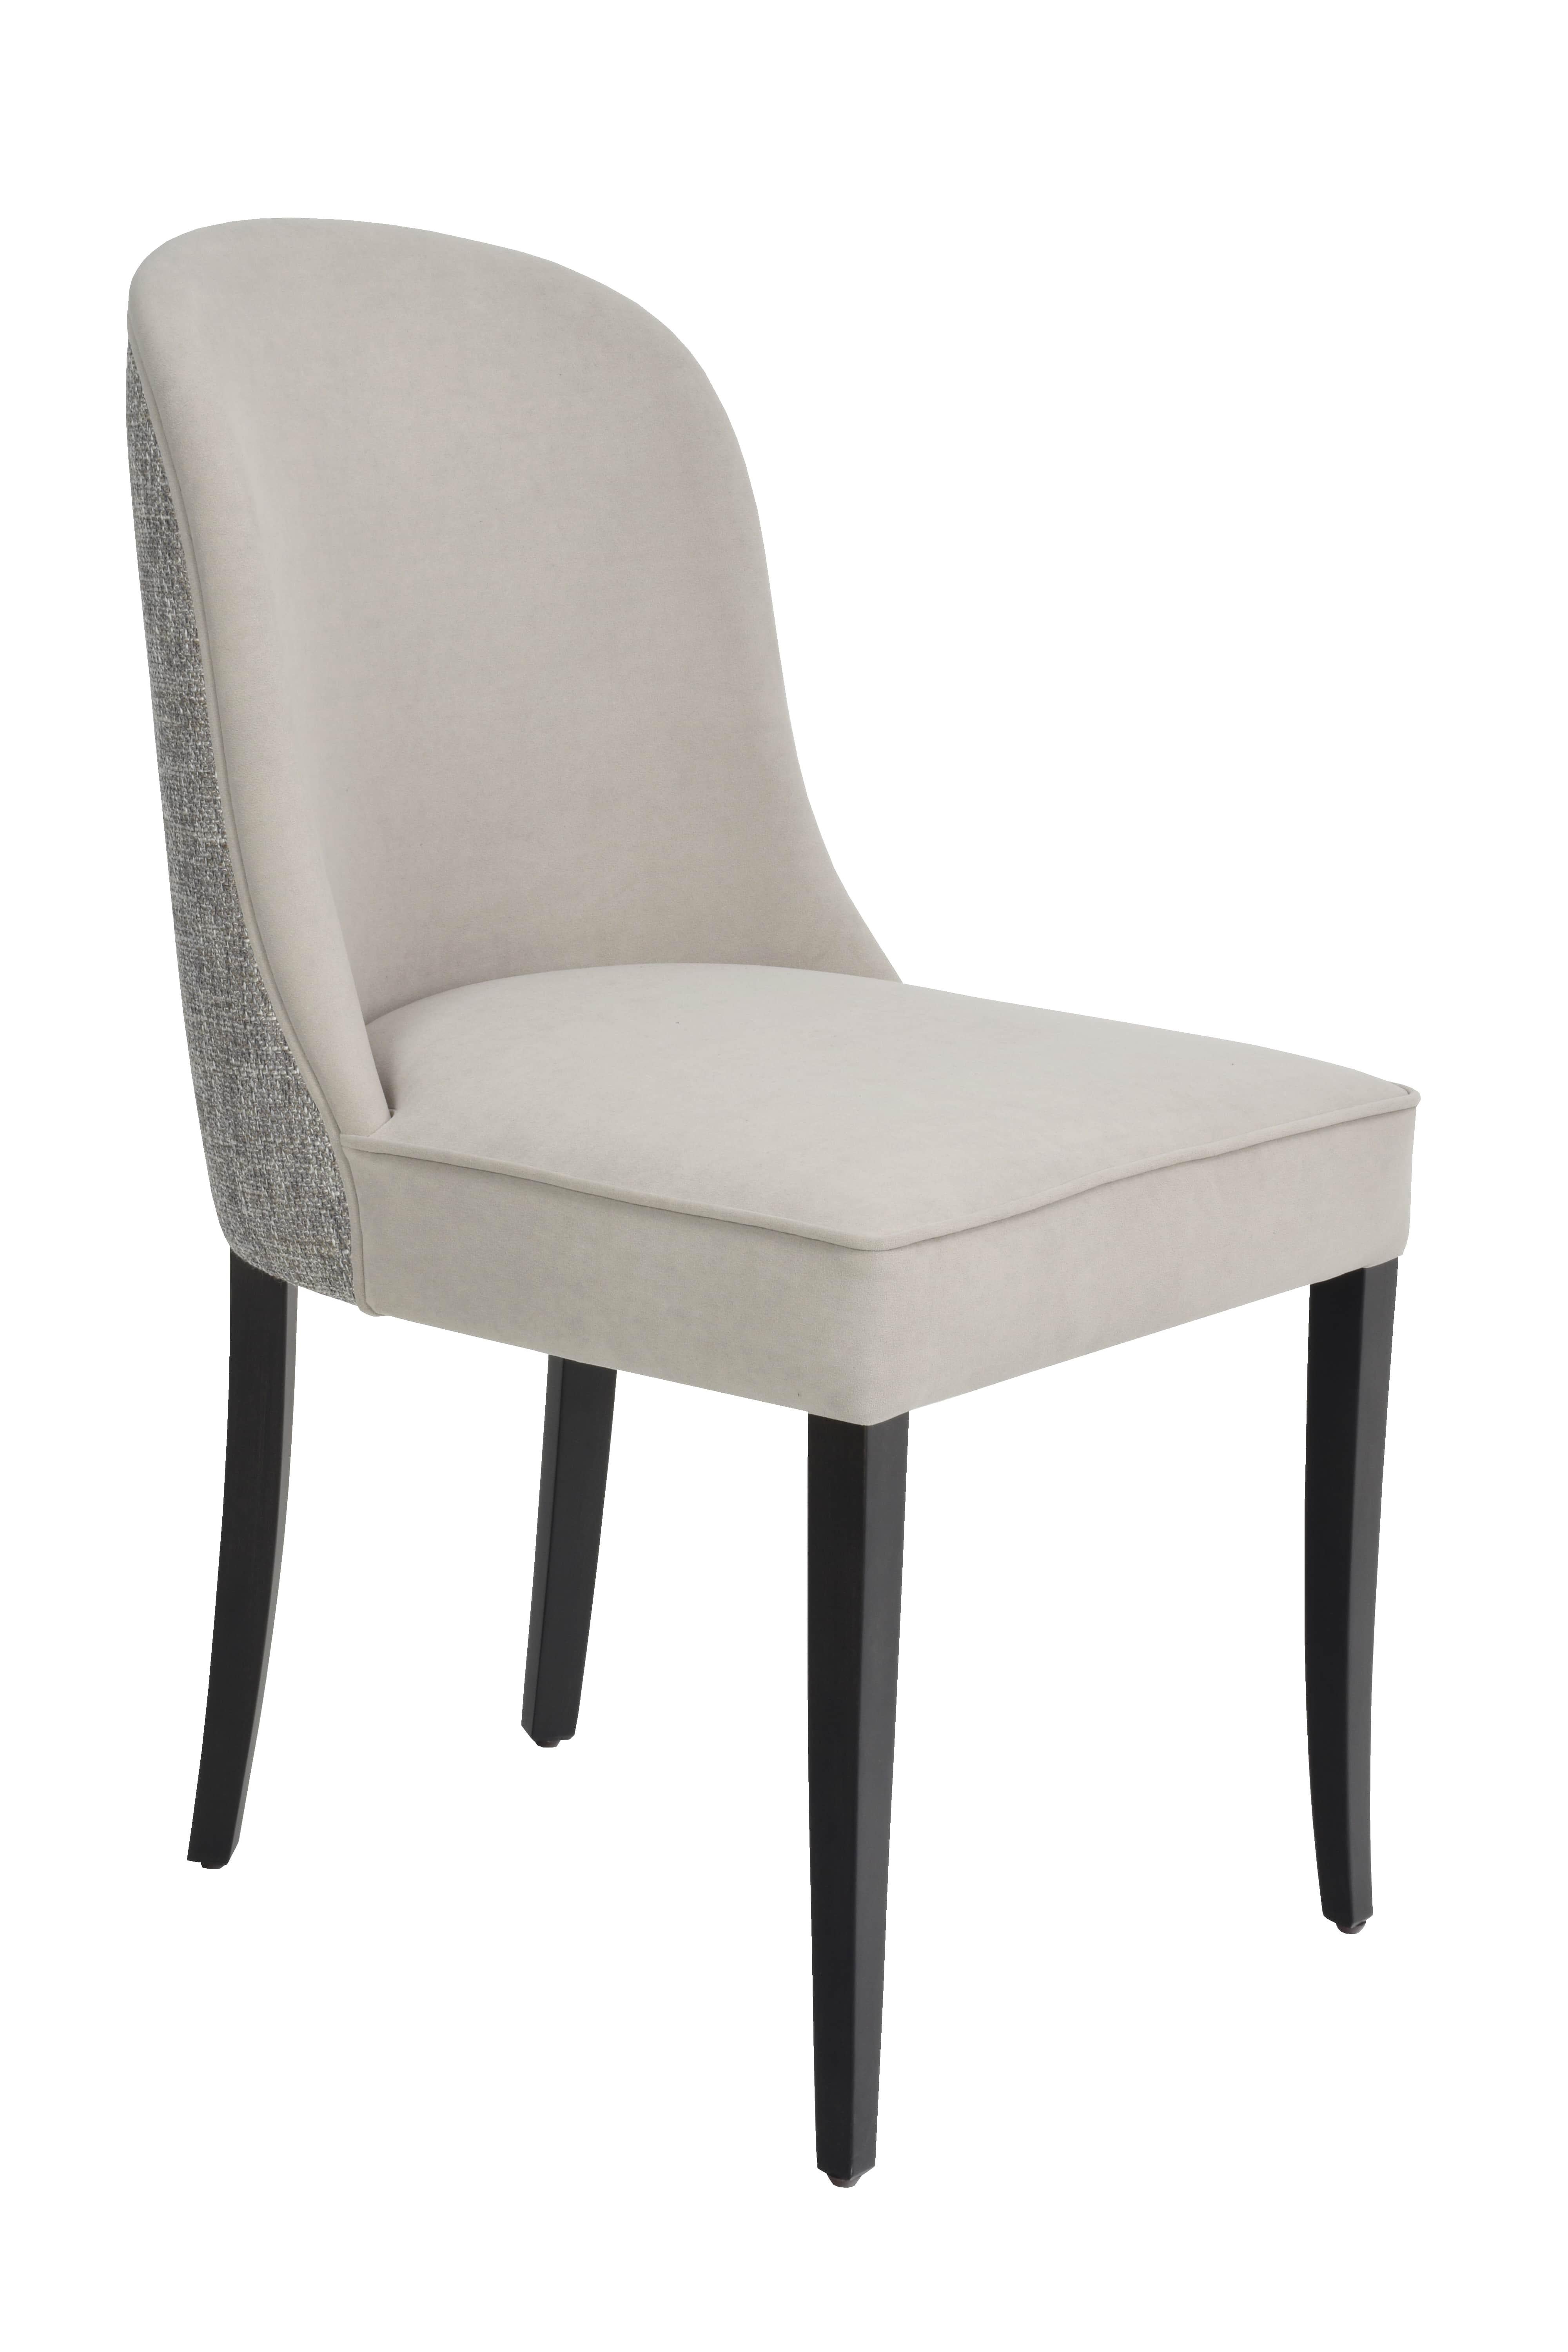 Introducing the BEIRUT chair, a masterpiece of effortless beauty and timeless design. This chair seamlessly blends simplicity with sophistication, featuring clean lines and an elegantly curved back that exudes style and comfort. Crafted with solid